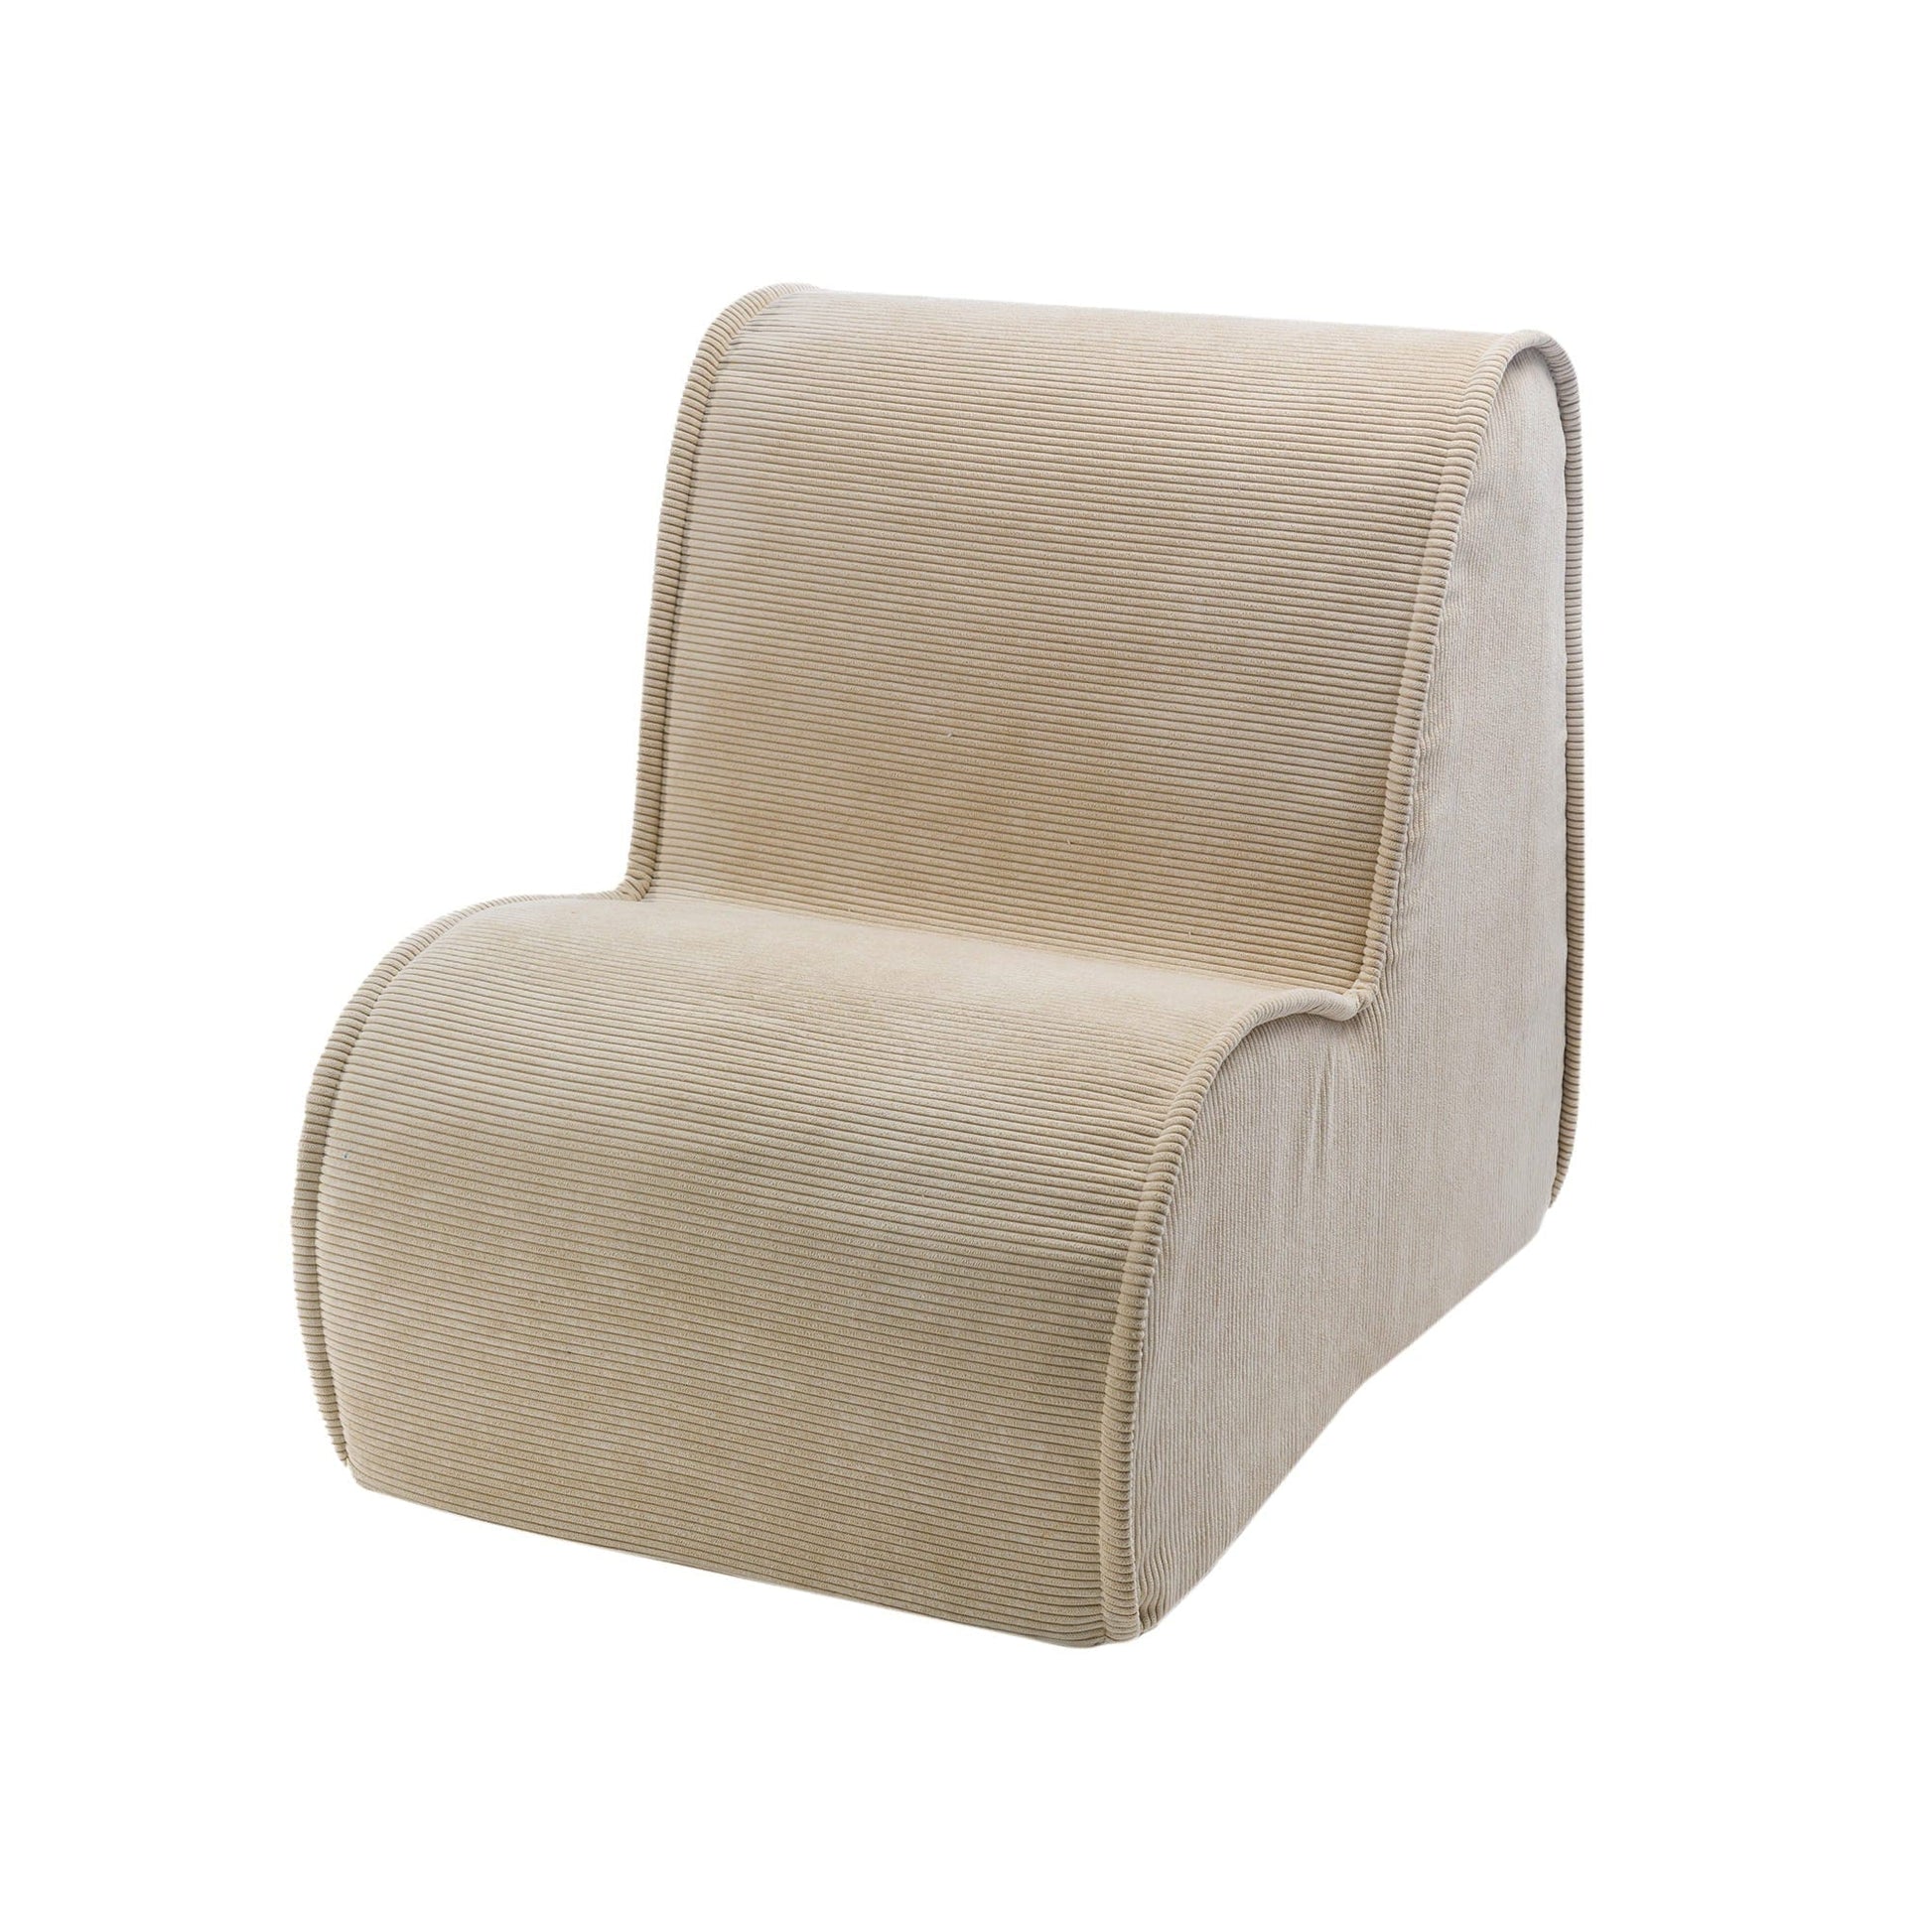 Luxury Corduroy Chair For Kids By MeowBaby - Stylemykid.com